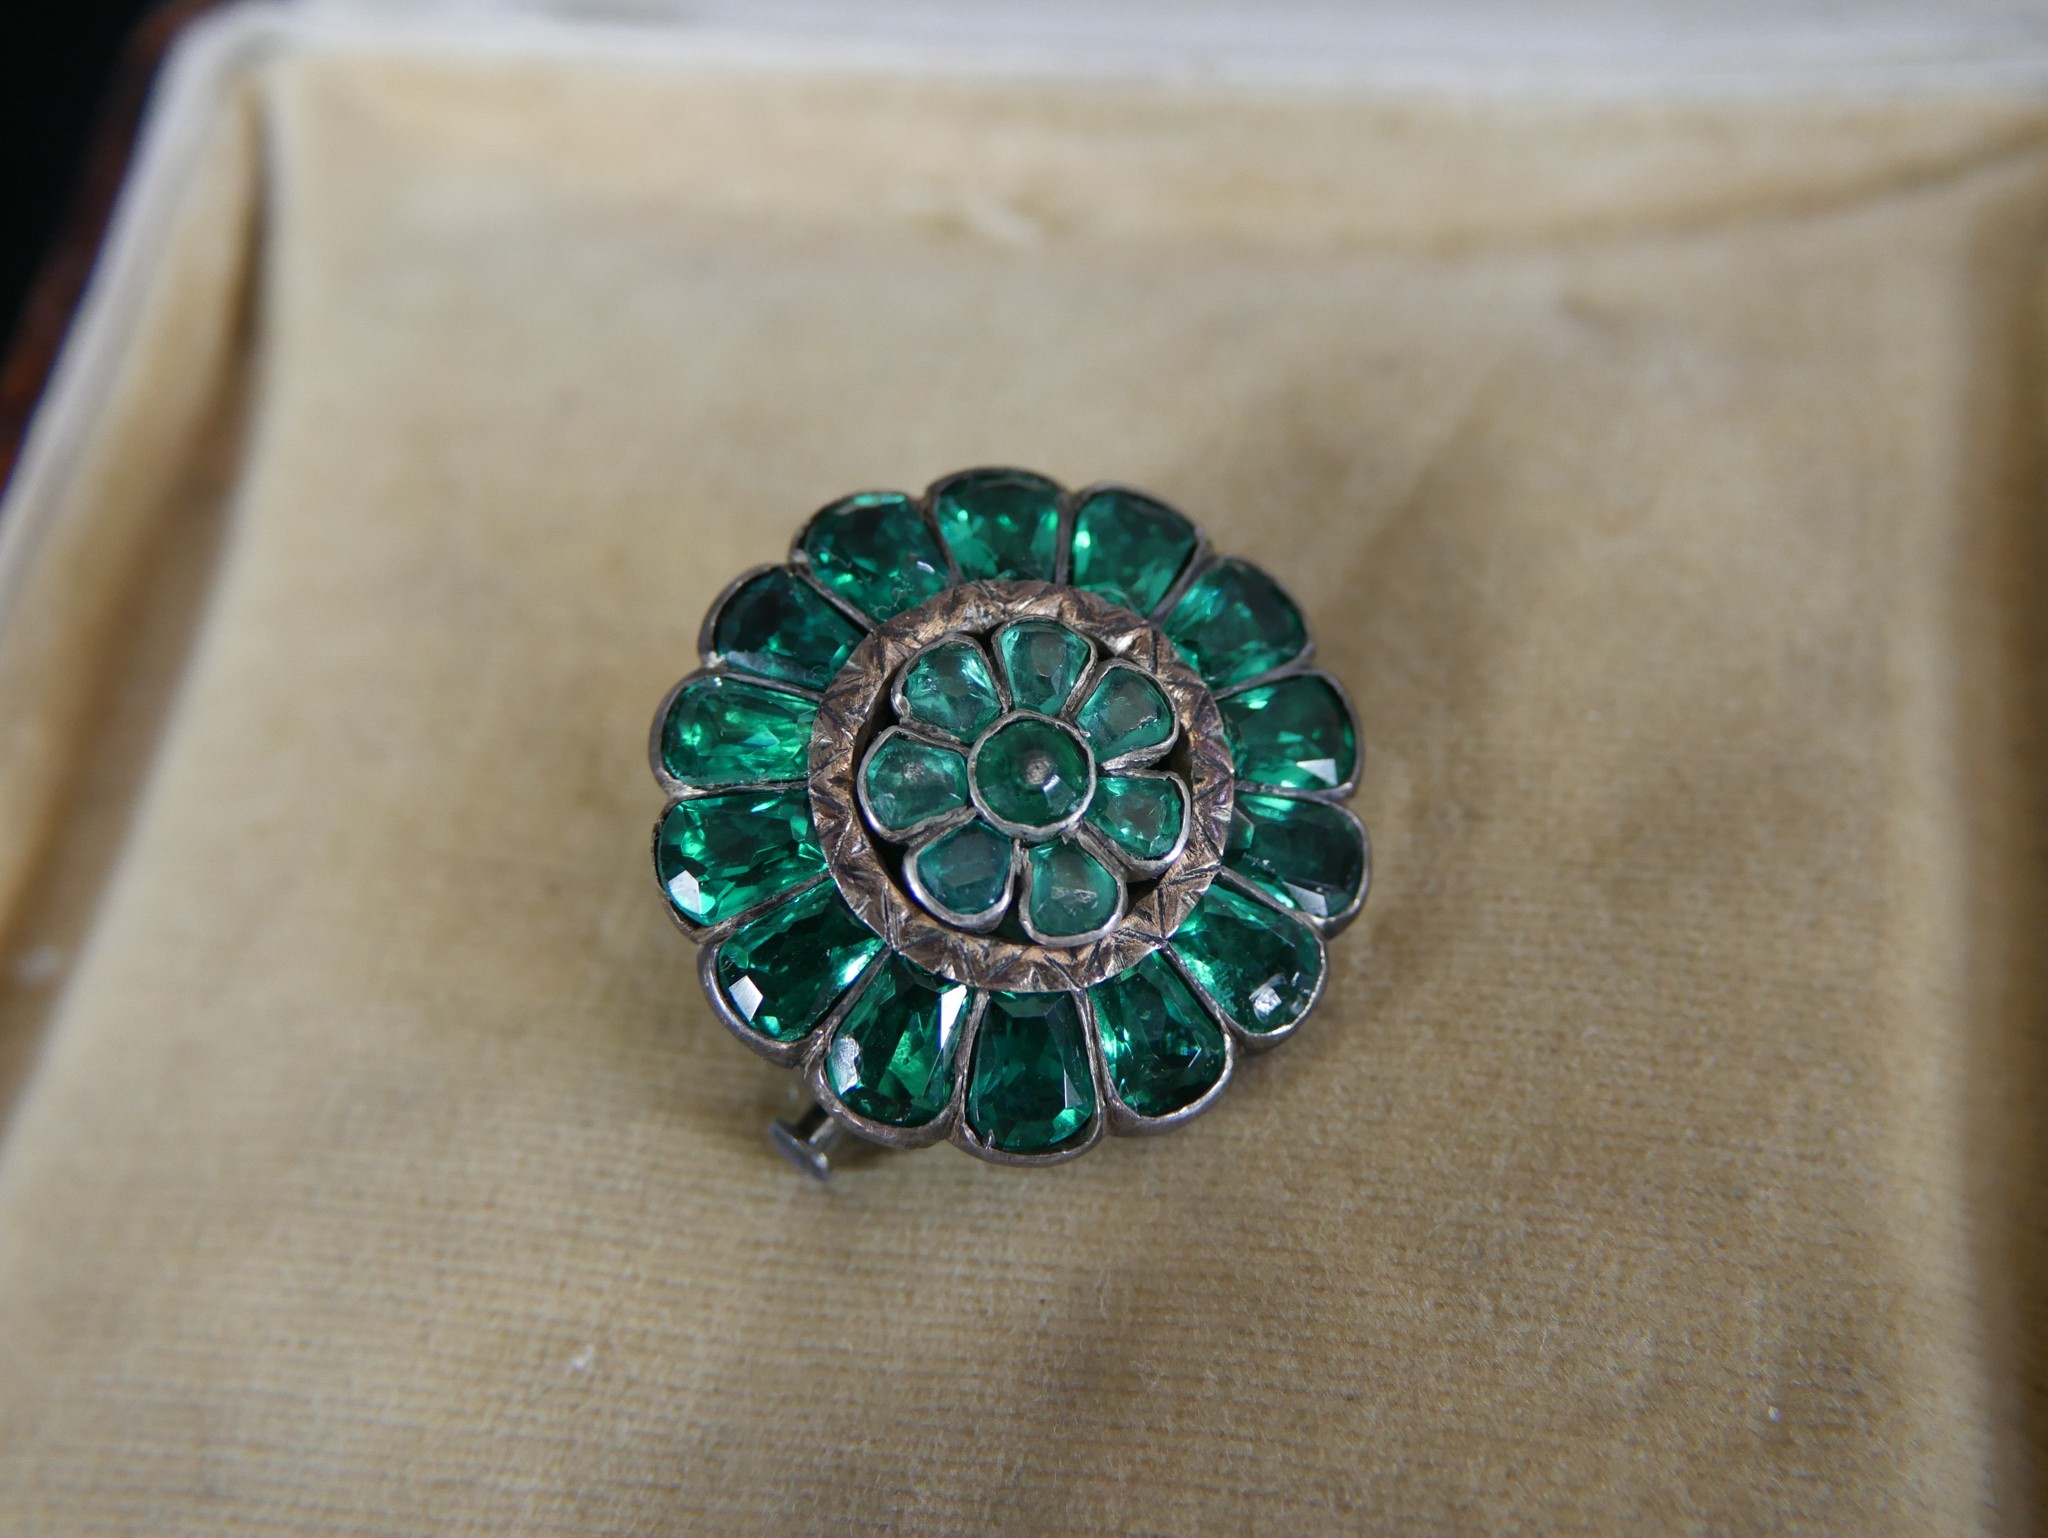 A green paste and white metal foil backed Georgian style floral brooch with secure pin and safety